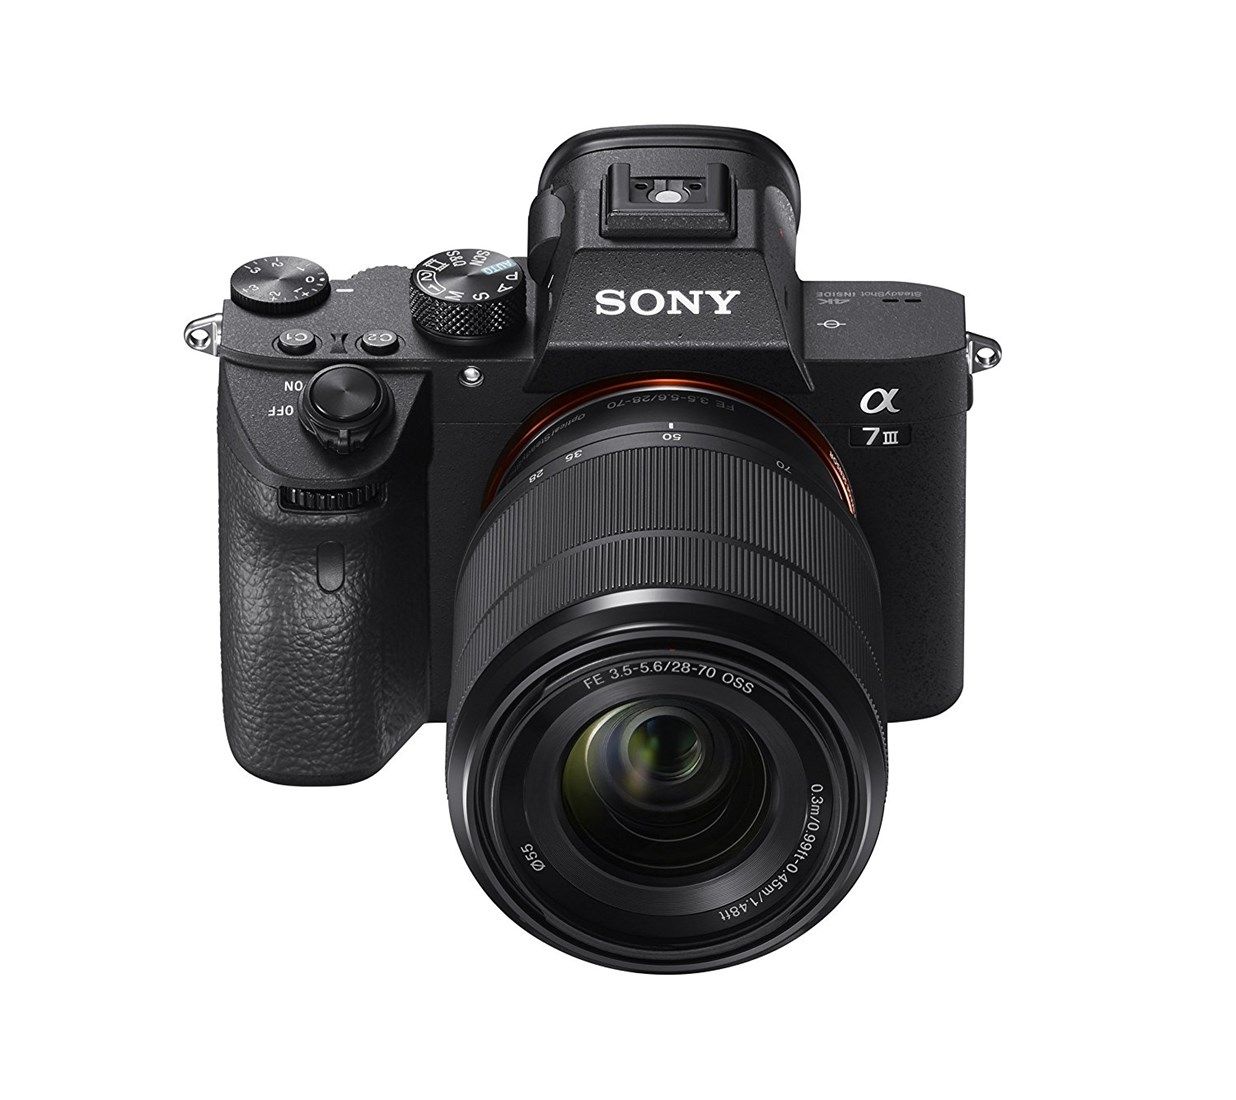 Sony Alpha 7III Mirrorless Digital Camera w/ 28-70mm Lens <br>w/ SanDisk  Extreme PRO 128GB 170mb/s SDXC UHS-1 Card + BC-QZ1 charger